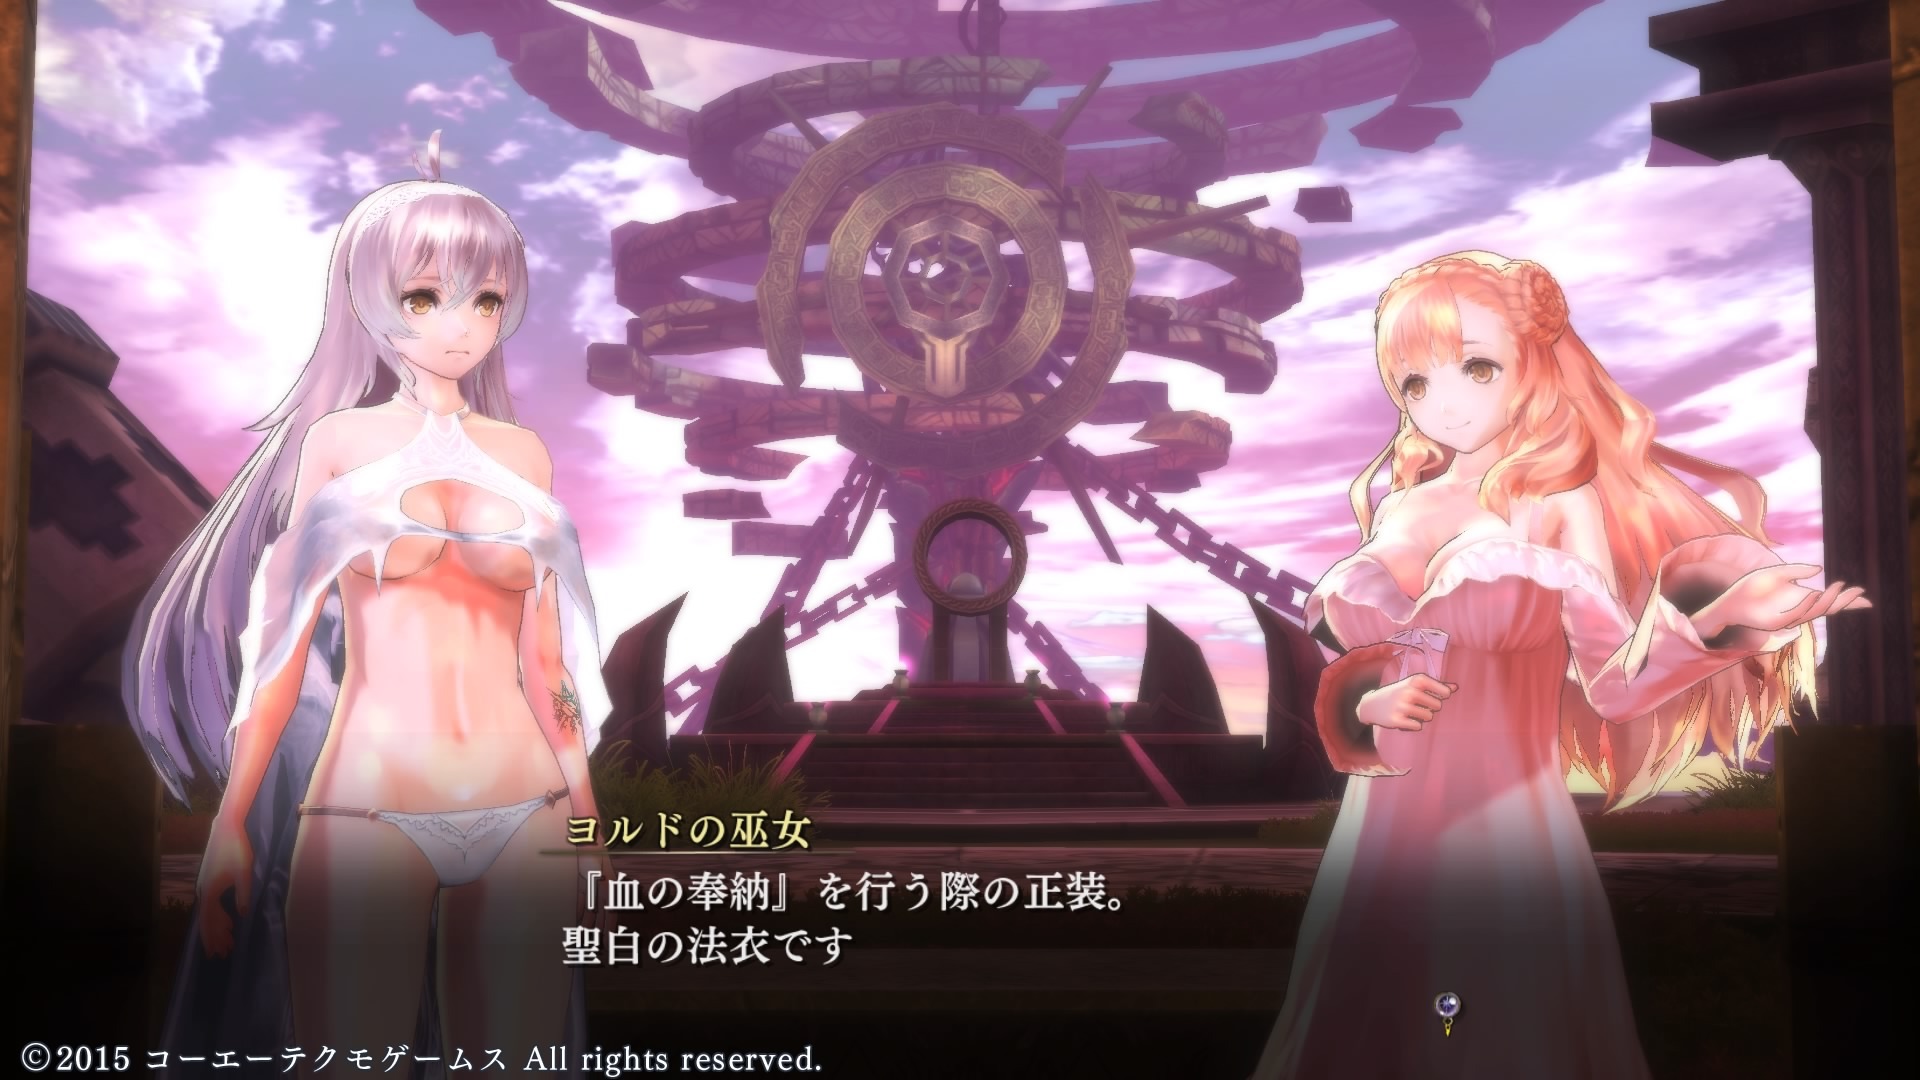 Review: Nights of Azure's PC Port Leave Much to Desire